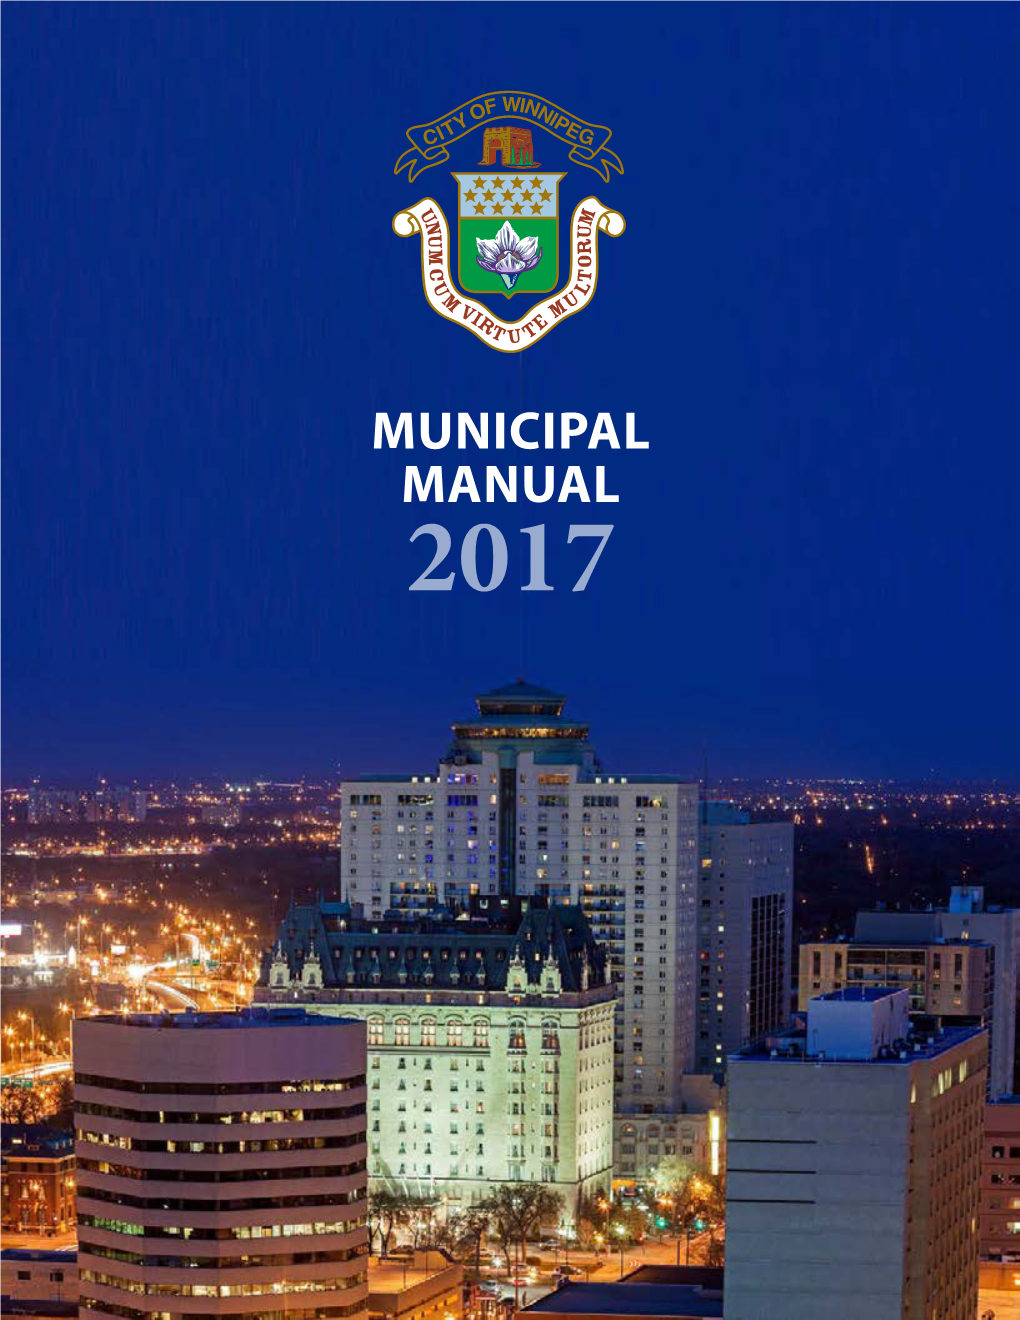 MUNICIPAL MANUAL 2017 Table of Contents